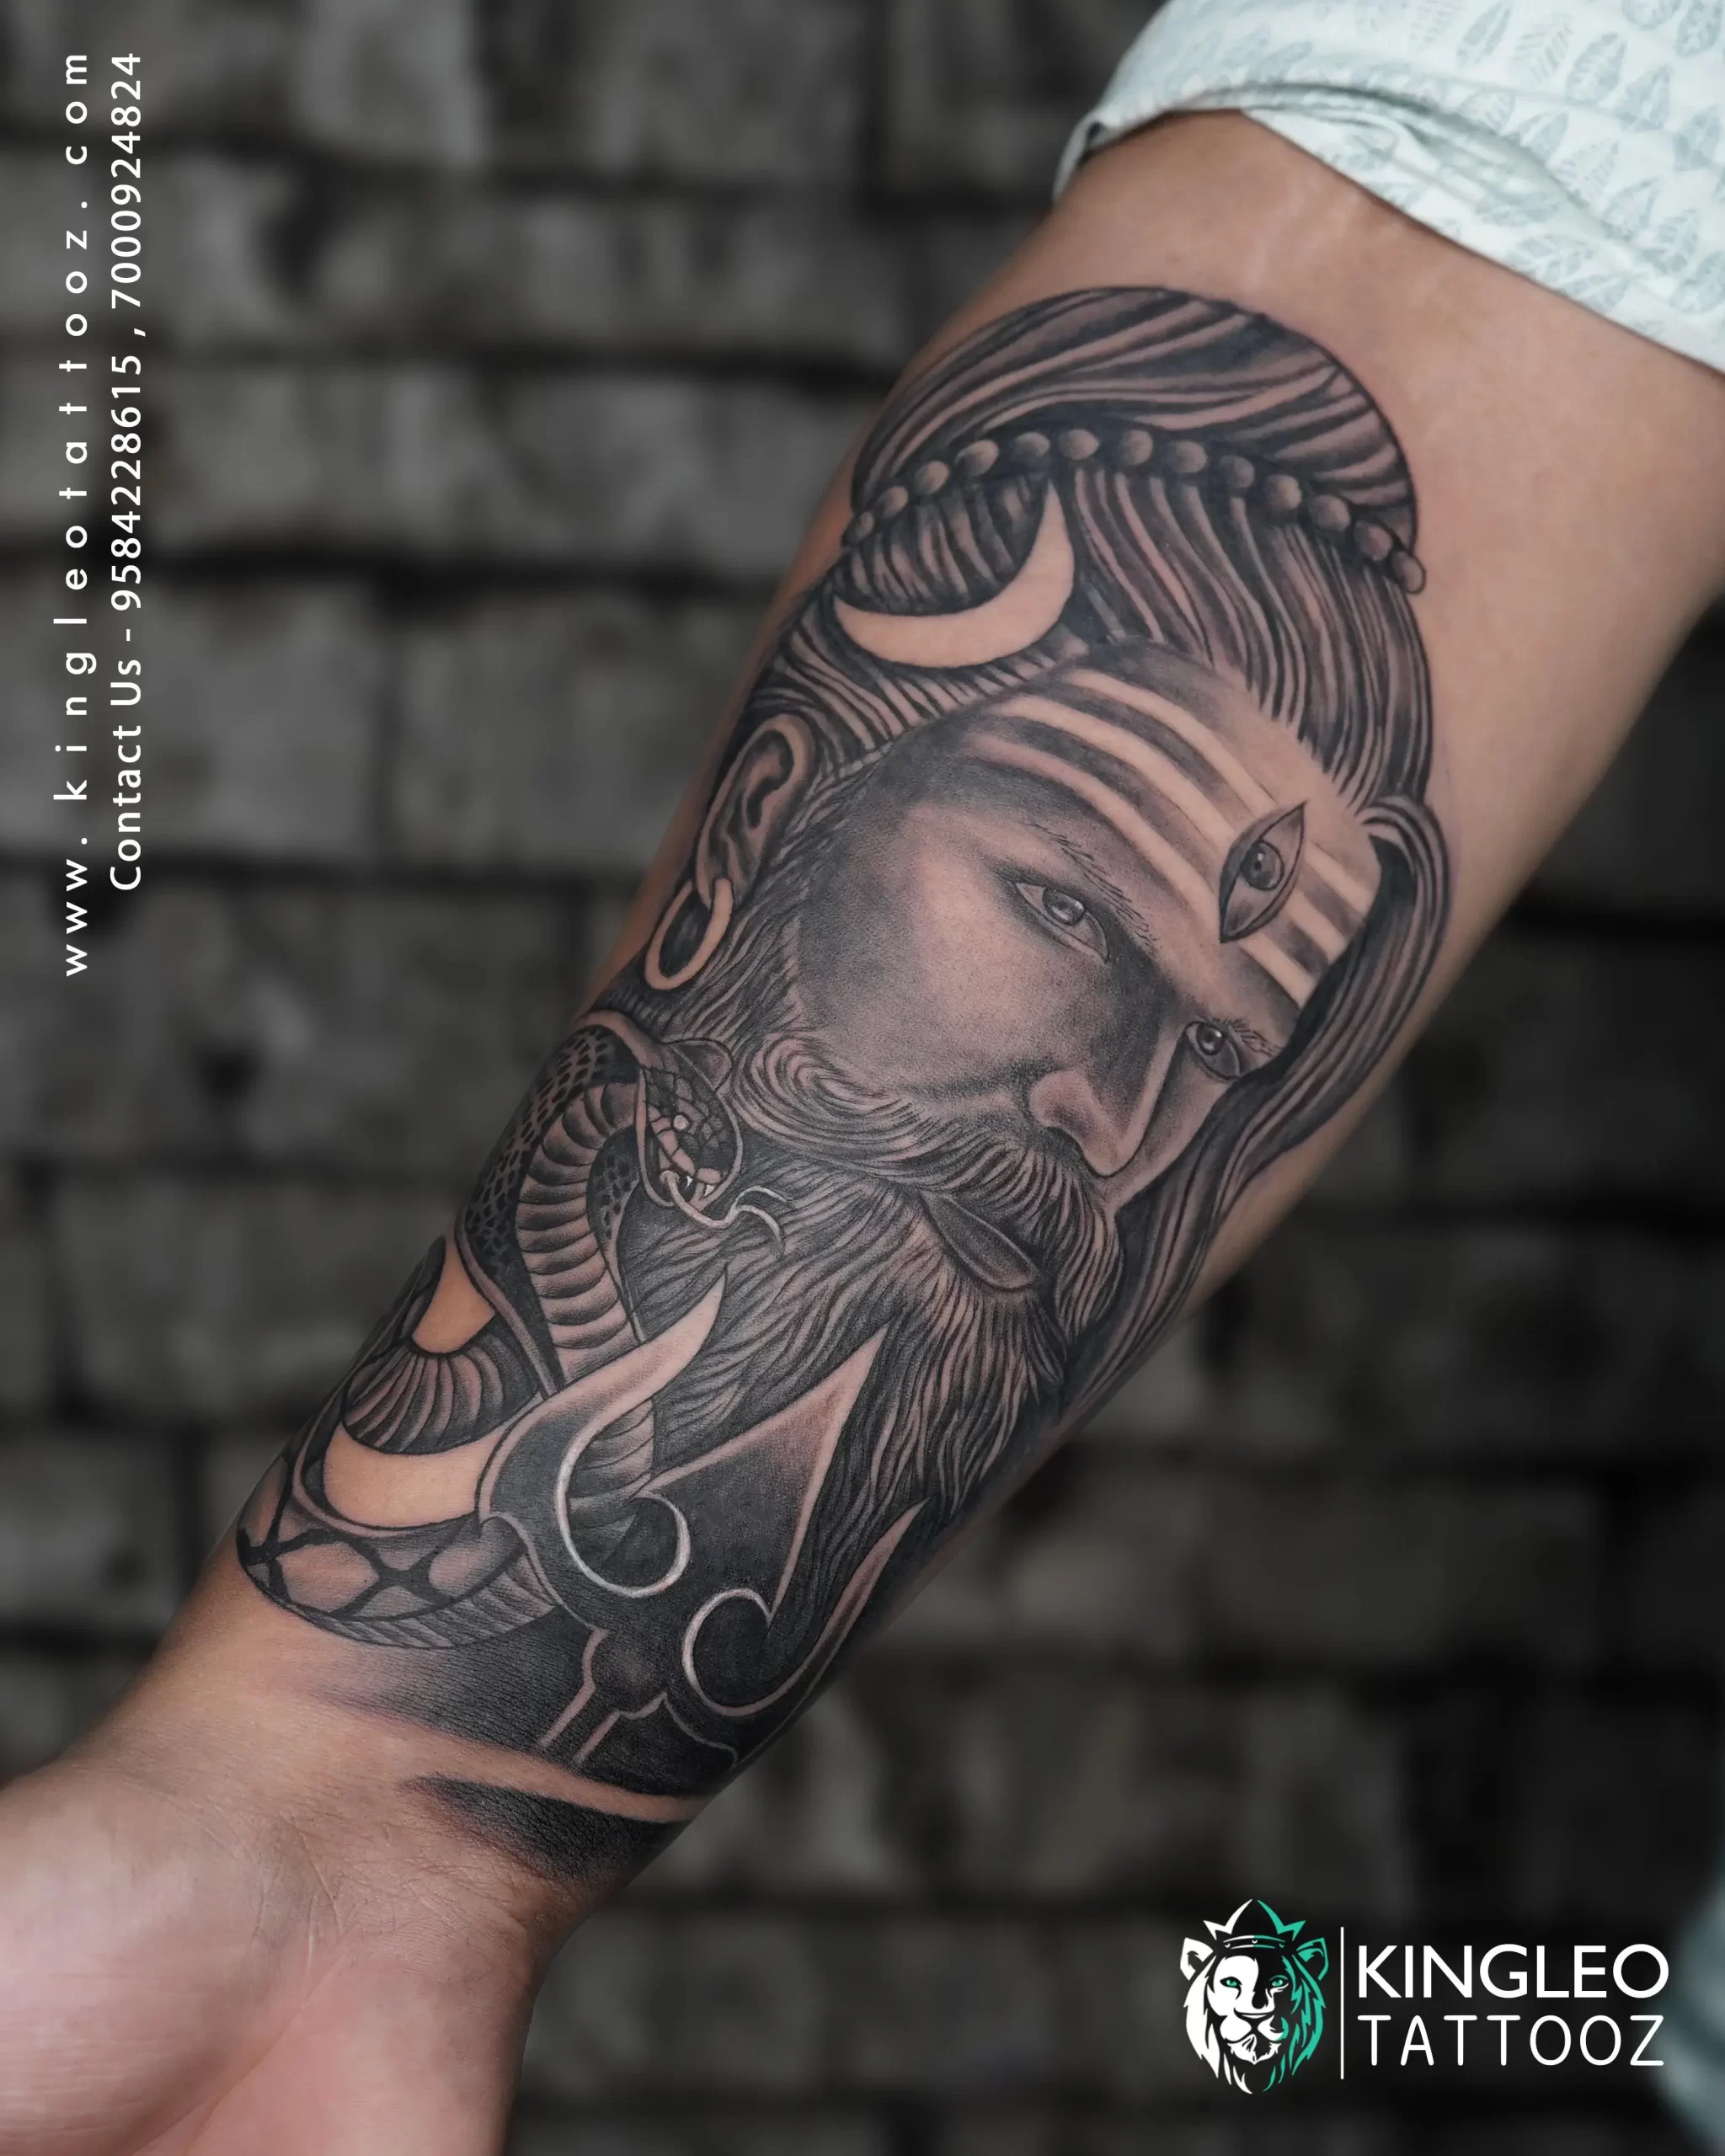 LOTUS TATTOO - A SYMBOL OF BEAUTY BLOSSOMING IN THE DIRT » One Of India's  Best Tattoo Studios In Bangalore - Eternal Expression | Best Tattoo Artist  In Bangalore | Best Tattoo